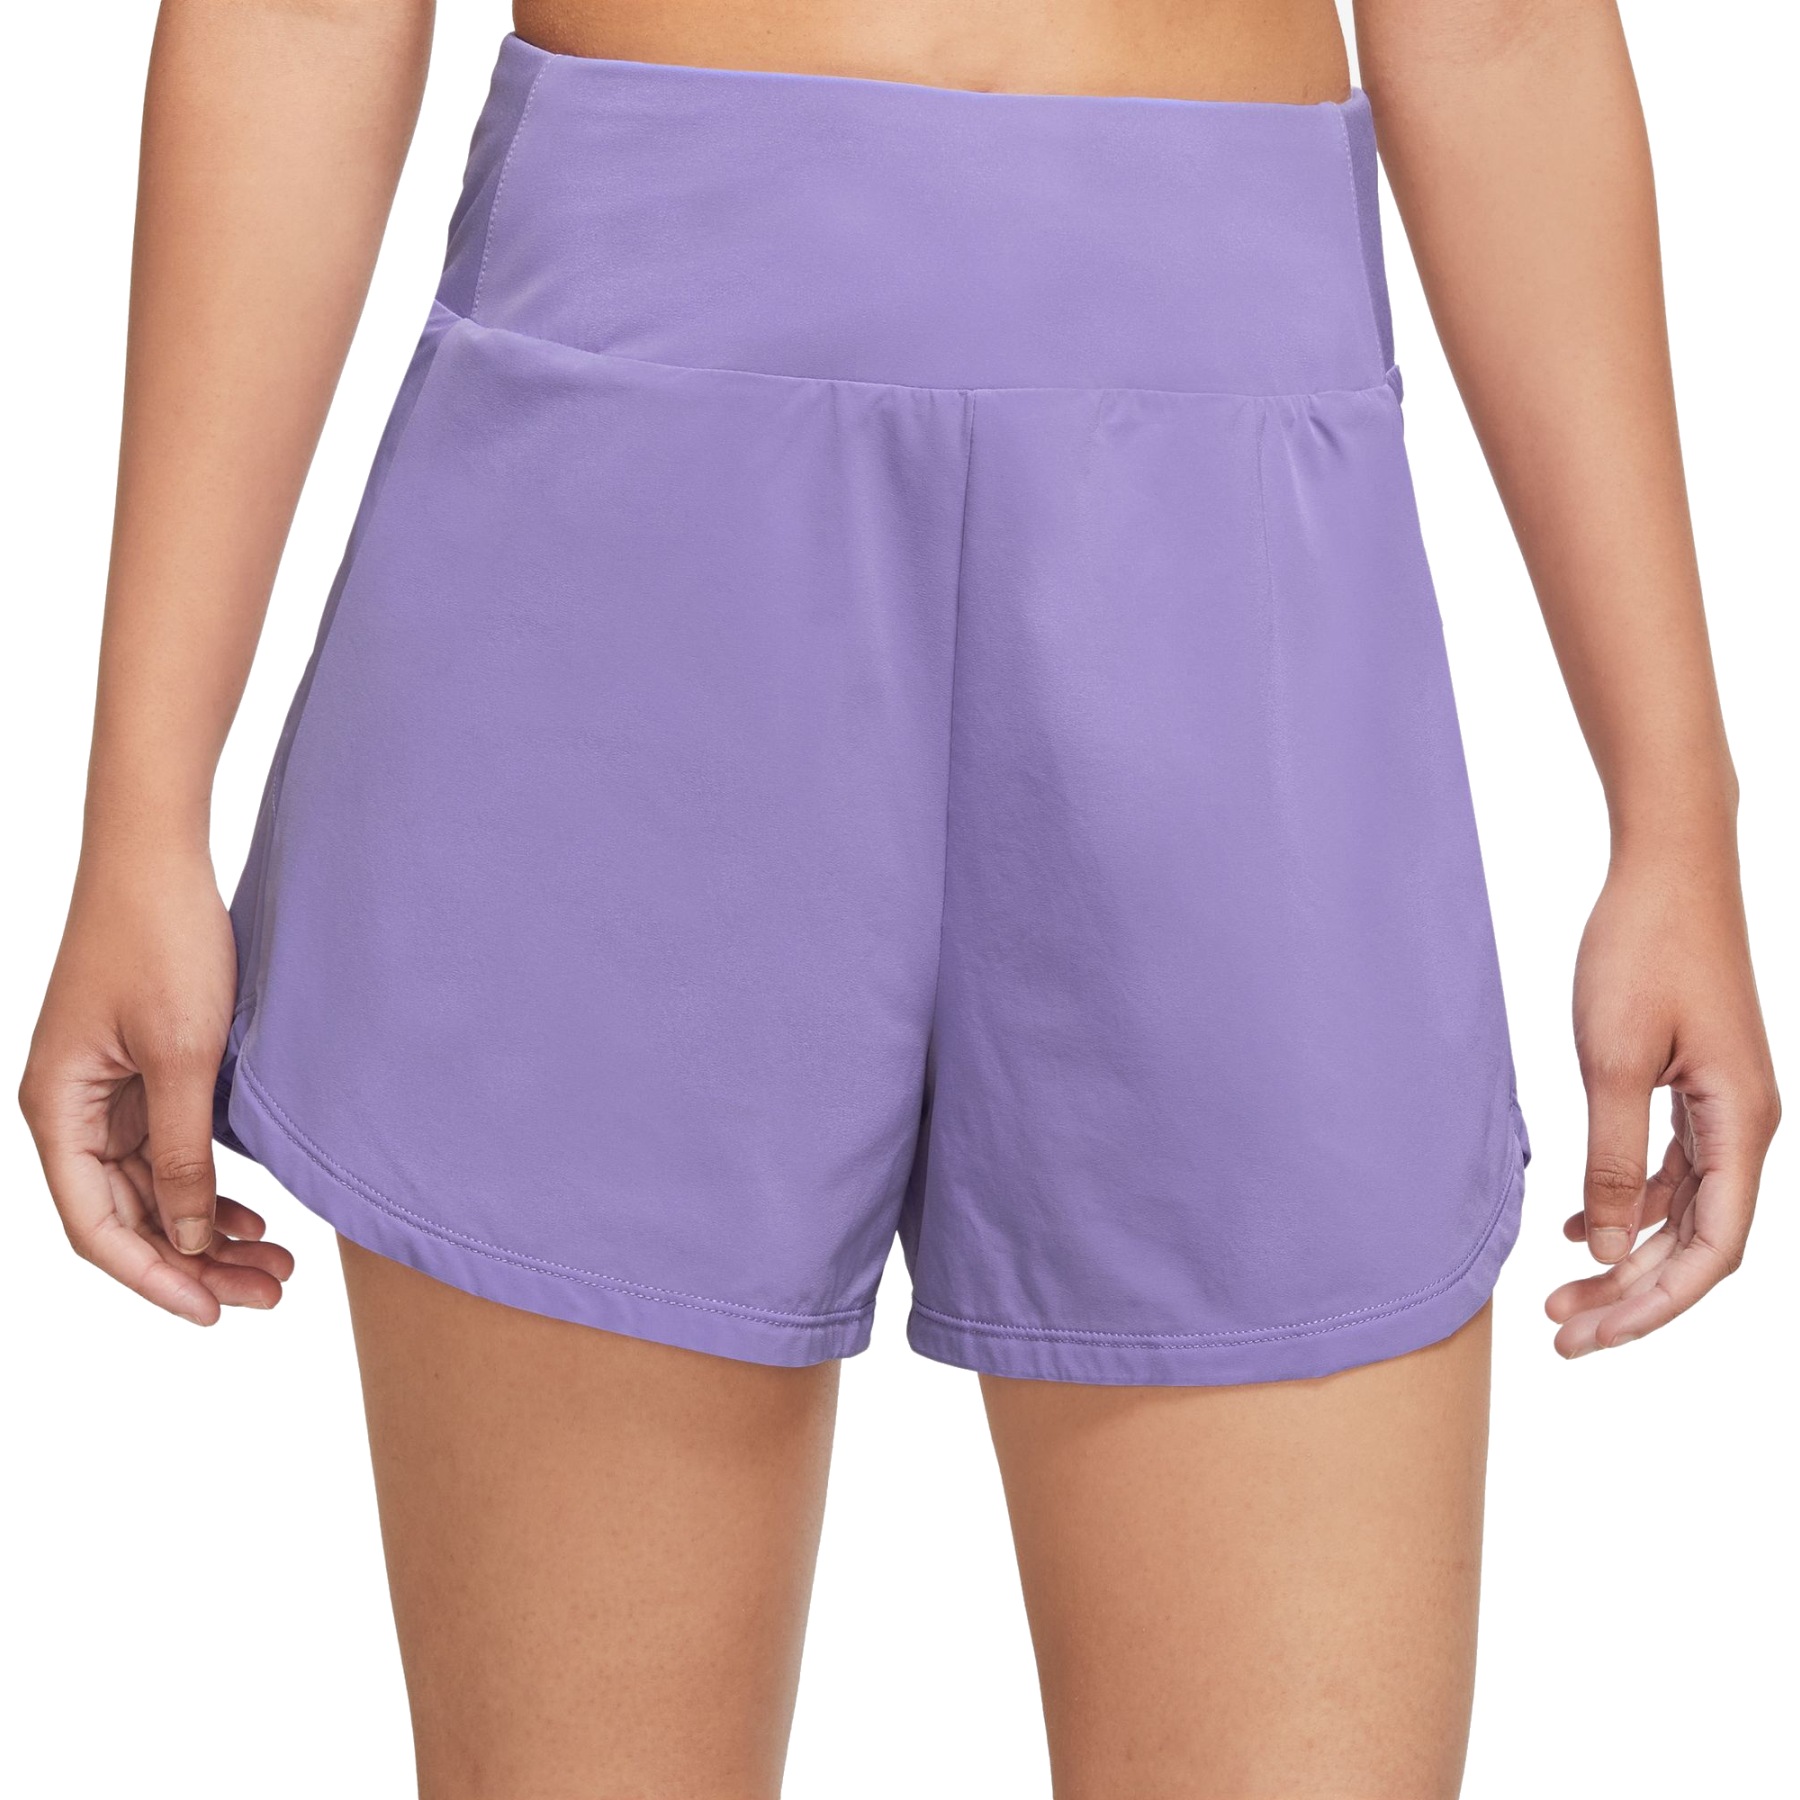 https://images.bike24.com/i/mb/7f/3d/1e/nike-bliss-dri-fit-womens-high-waisted-3-brief-lined-shorts-space-purple-reflective-silver-dx6018-567-3-1478751.jpg